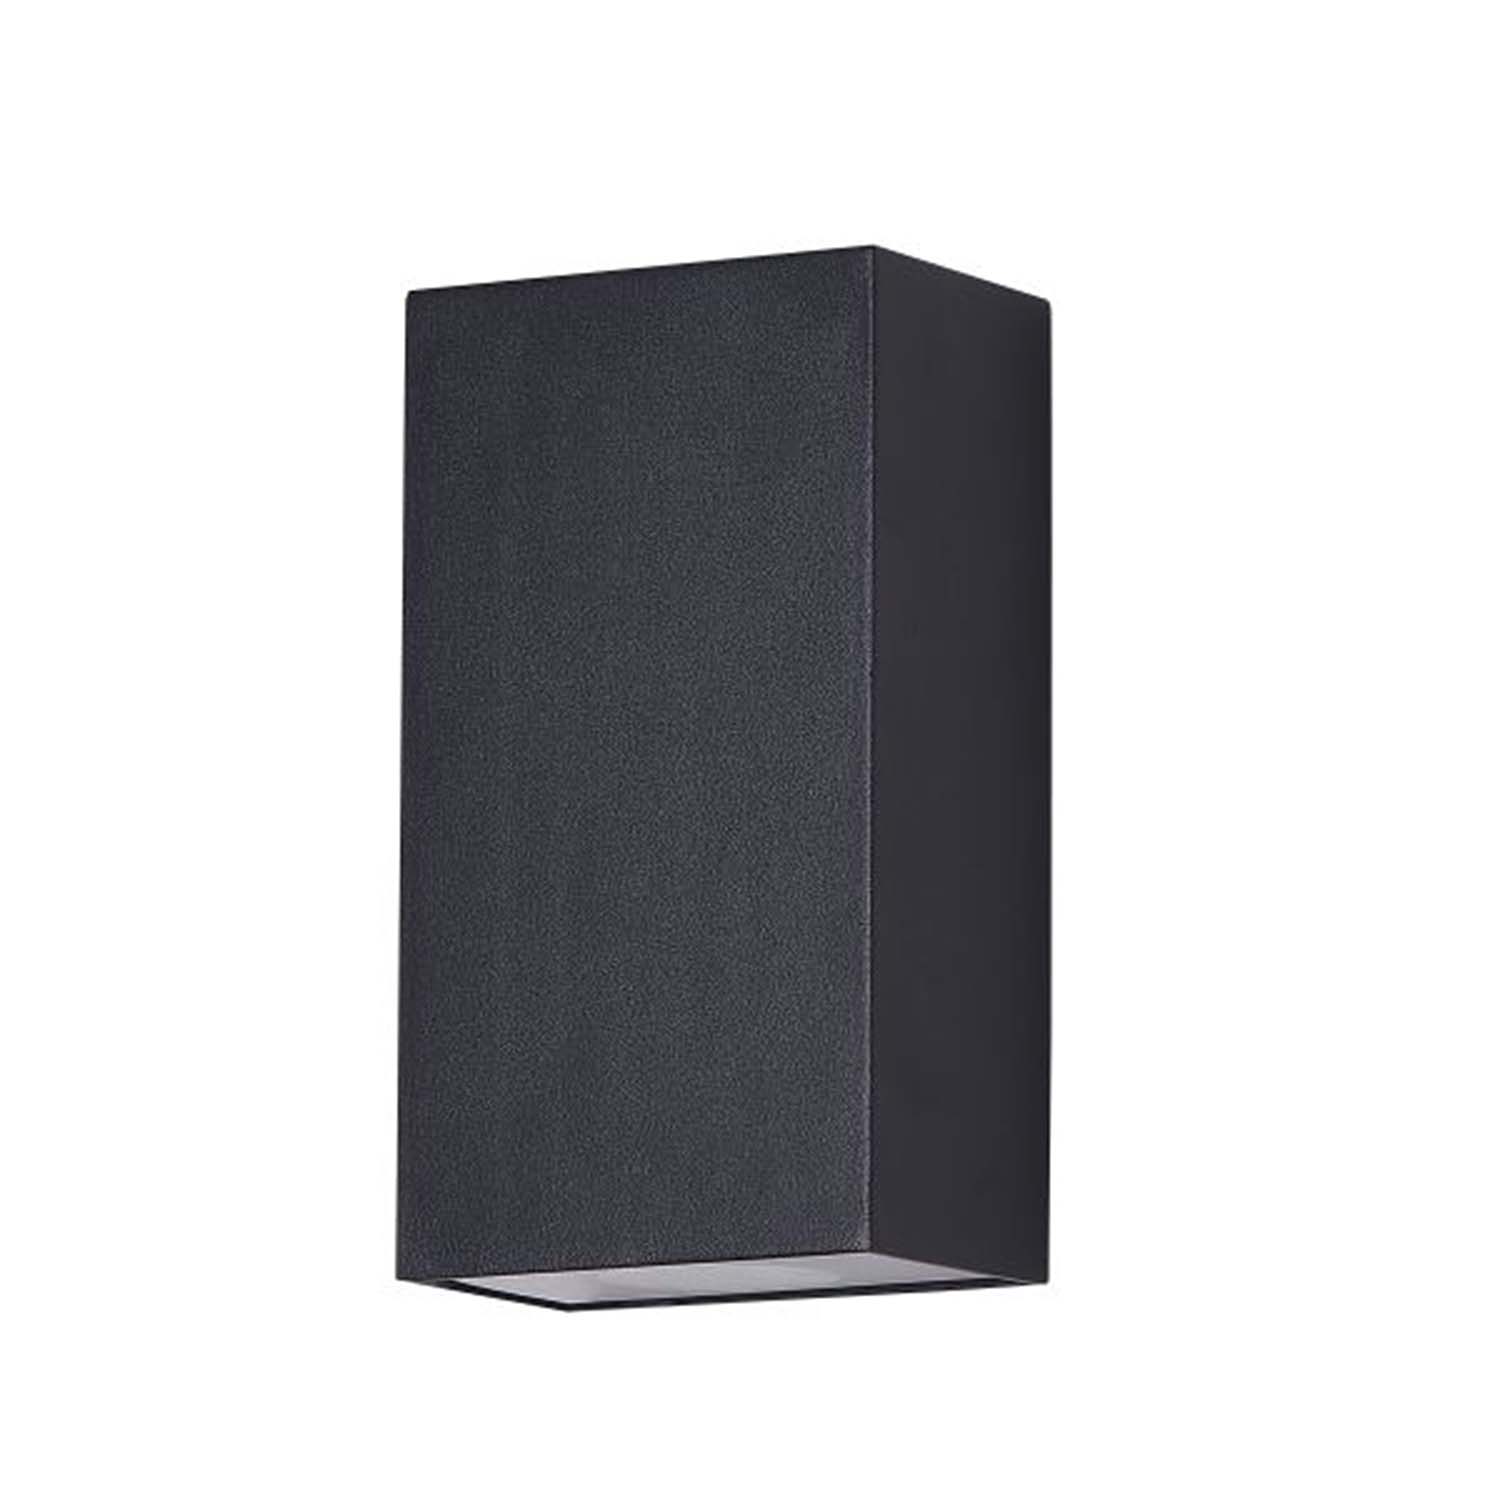 TIMES SQUARE - Black exterior wall light with waterproof rectangle design